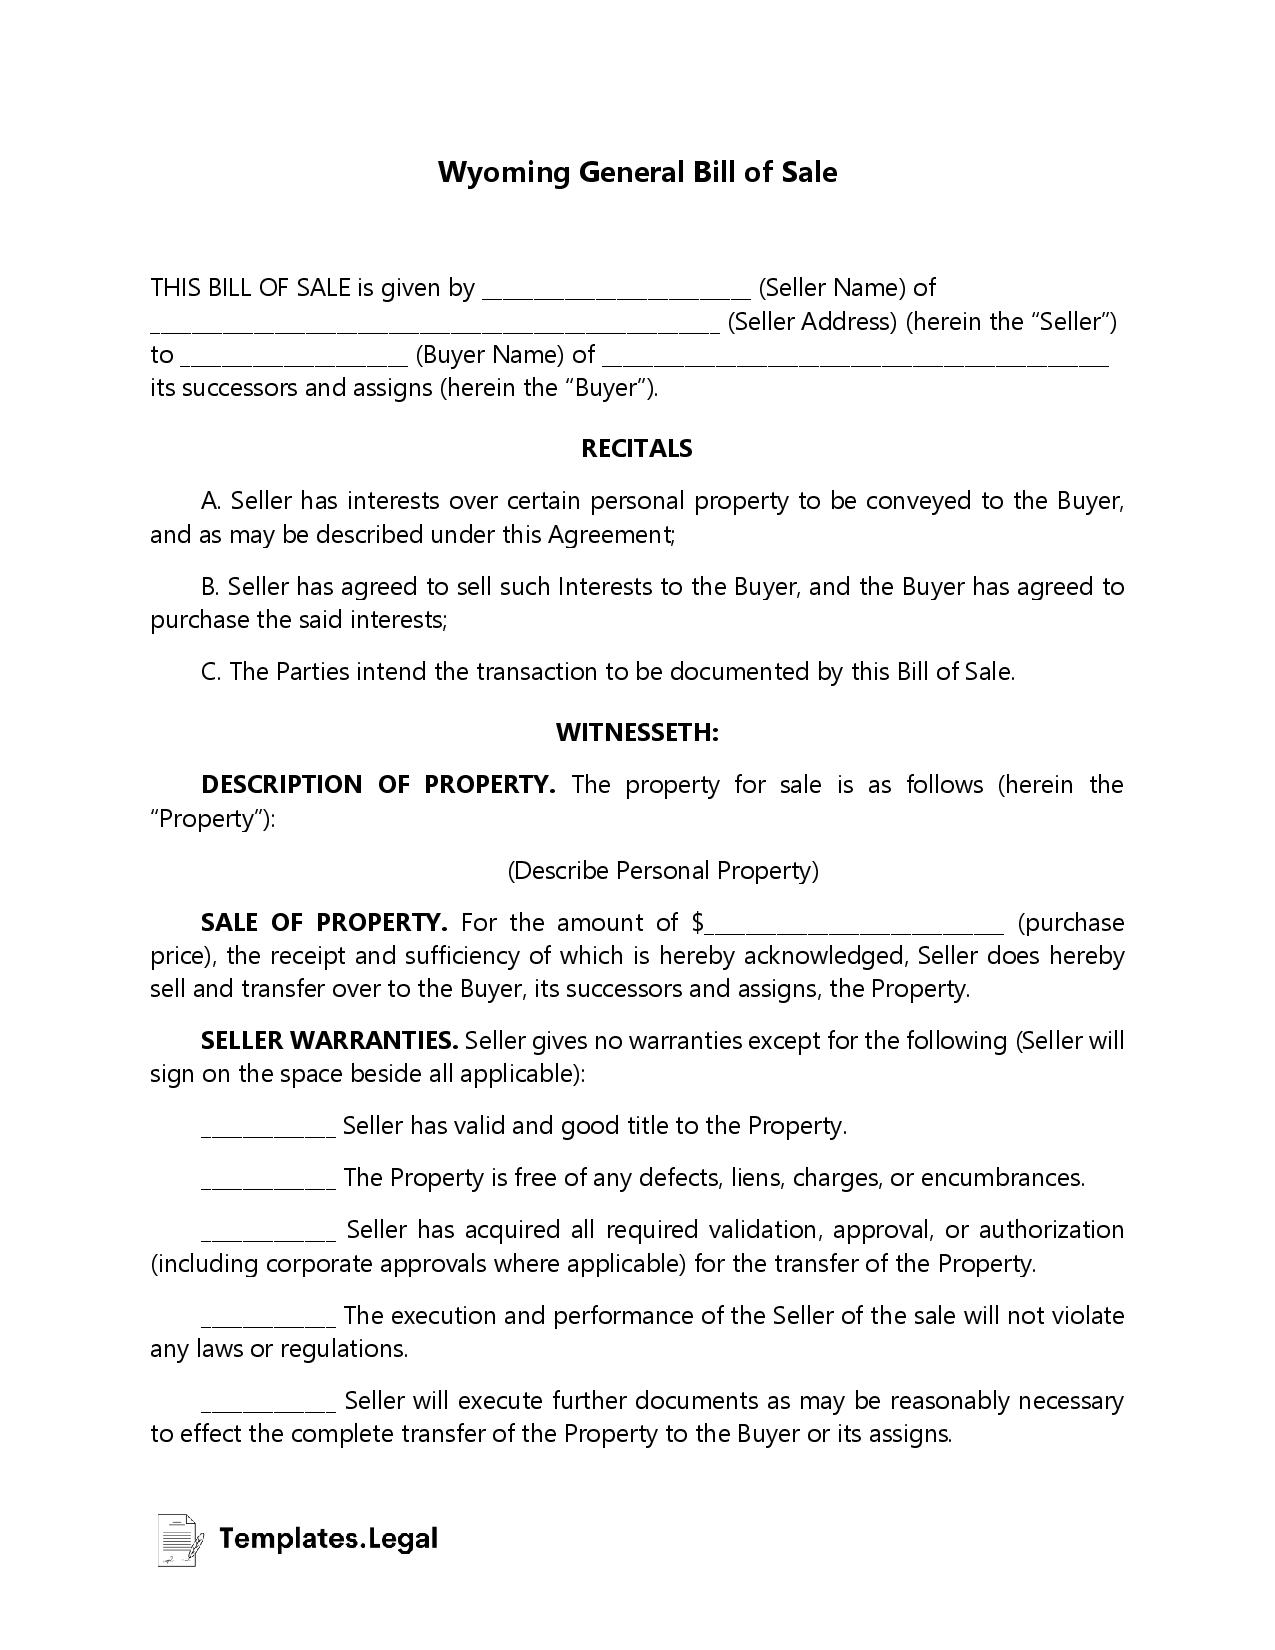 Wyoming General Bill of Sale - Templates.Legal